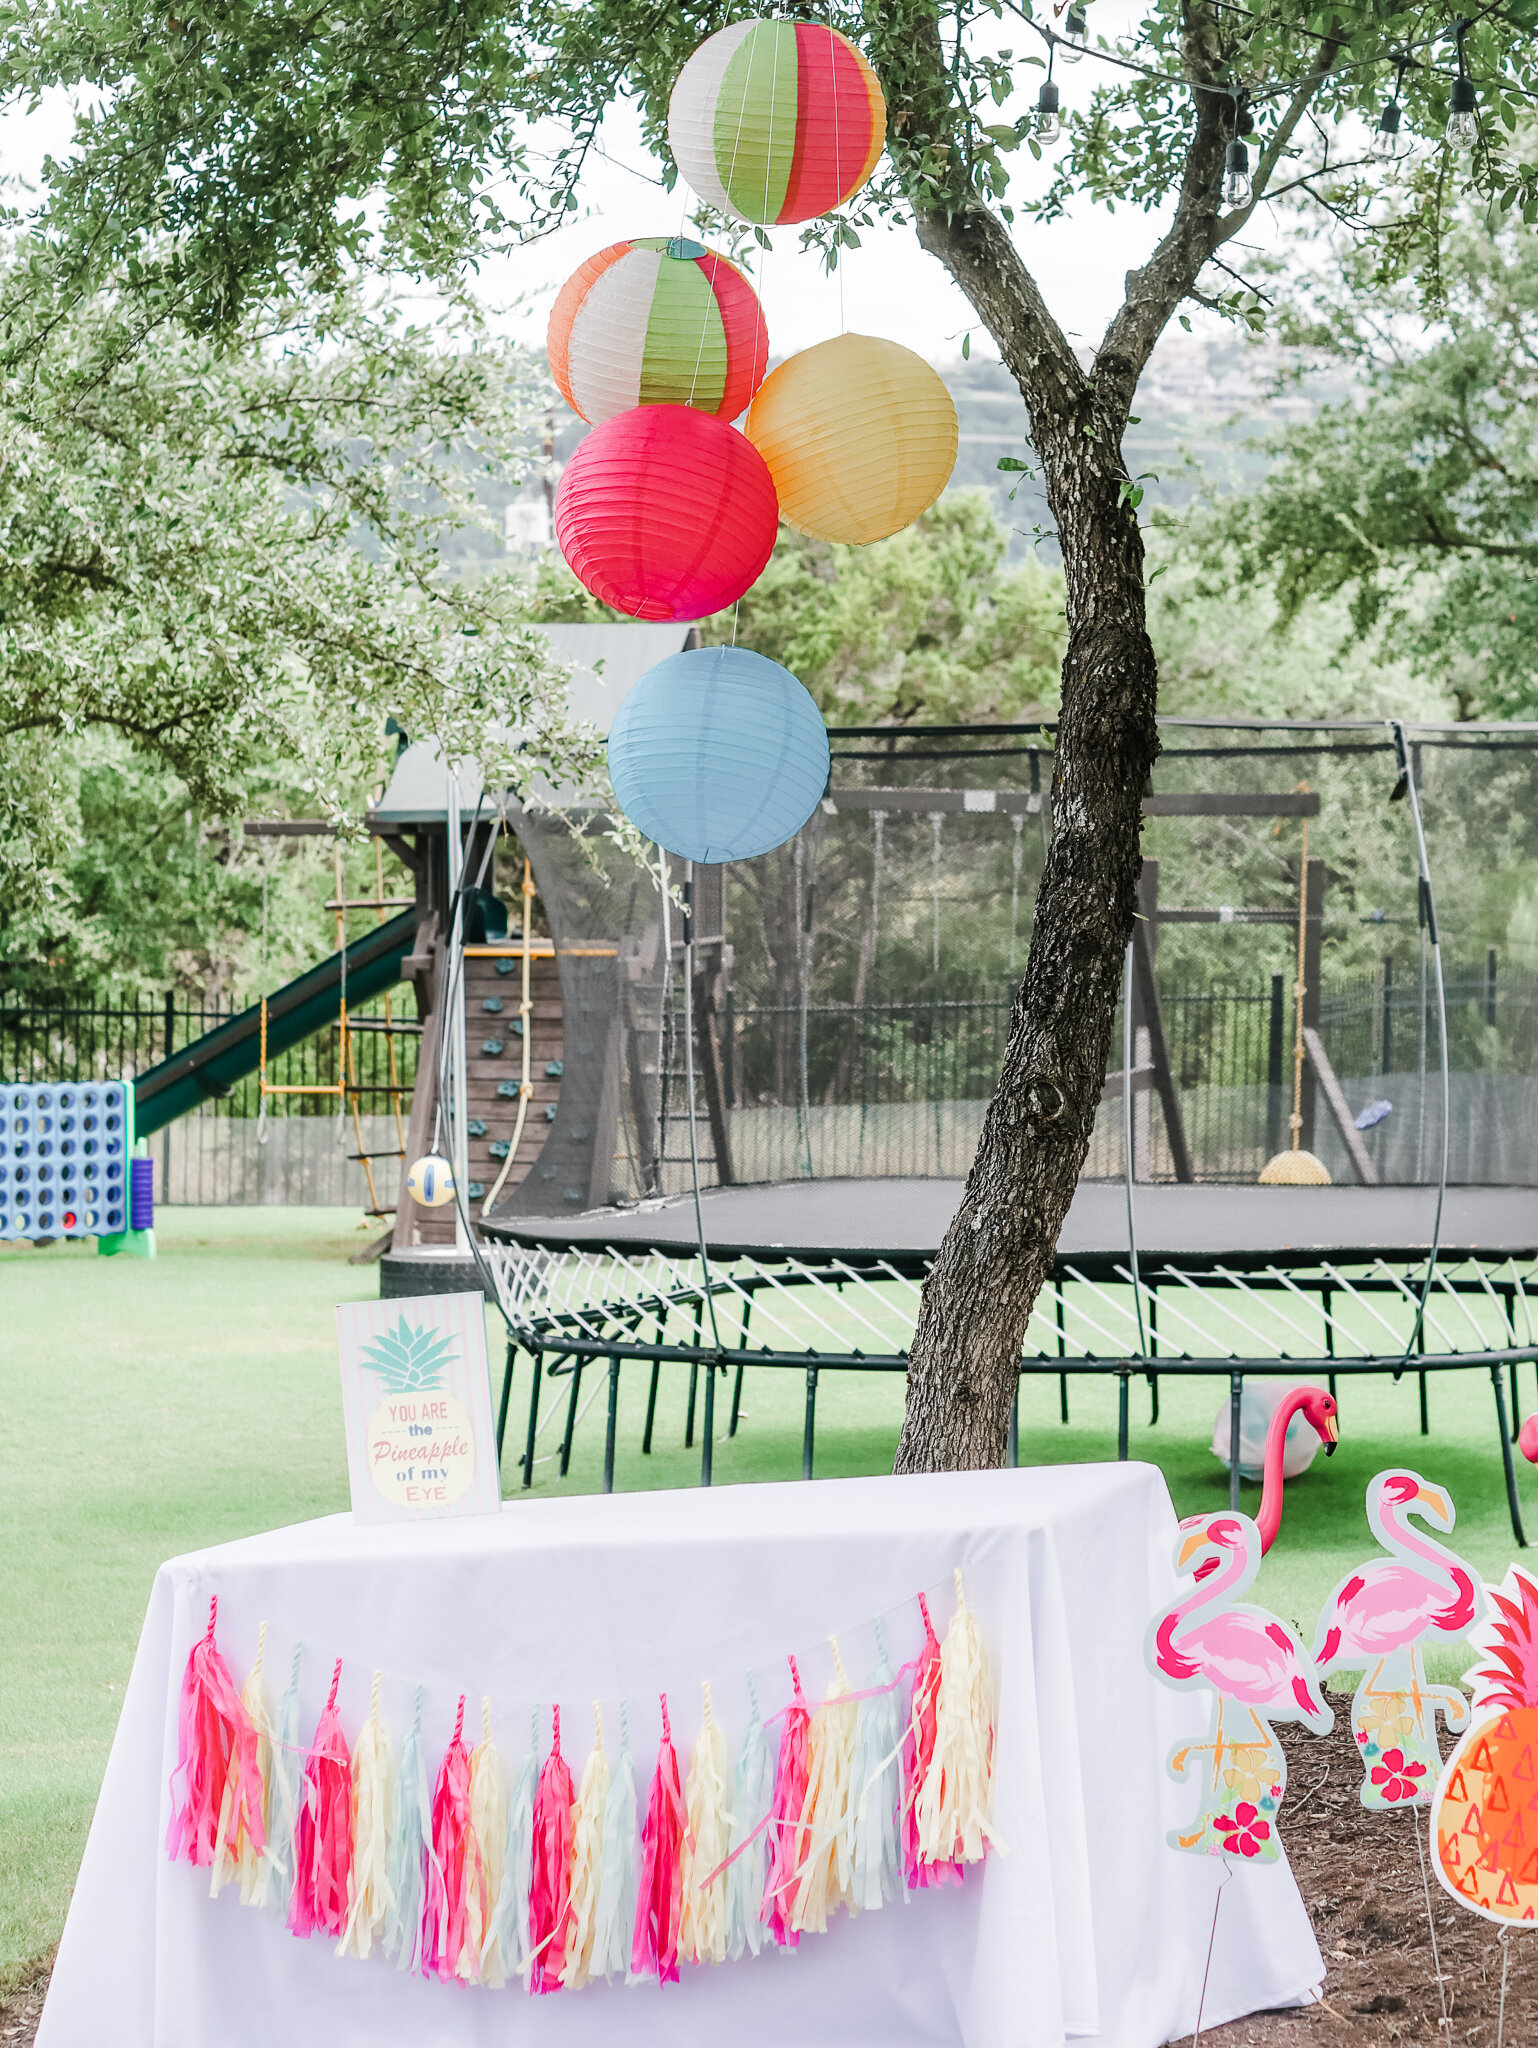  Welcome to the kids tropical birthday party. There’s tropical colored paper fringe garland and paper lanterns hanging to resemble beach balls. Come see all the tropical party details on Mint Event Design www.minteventdesign.com 